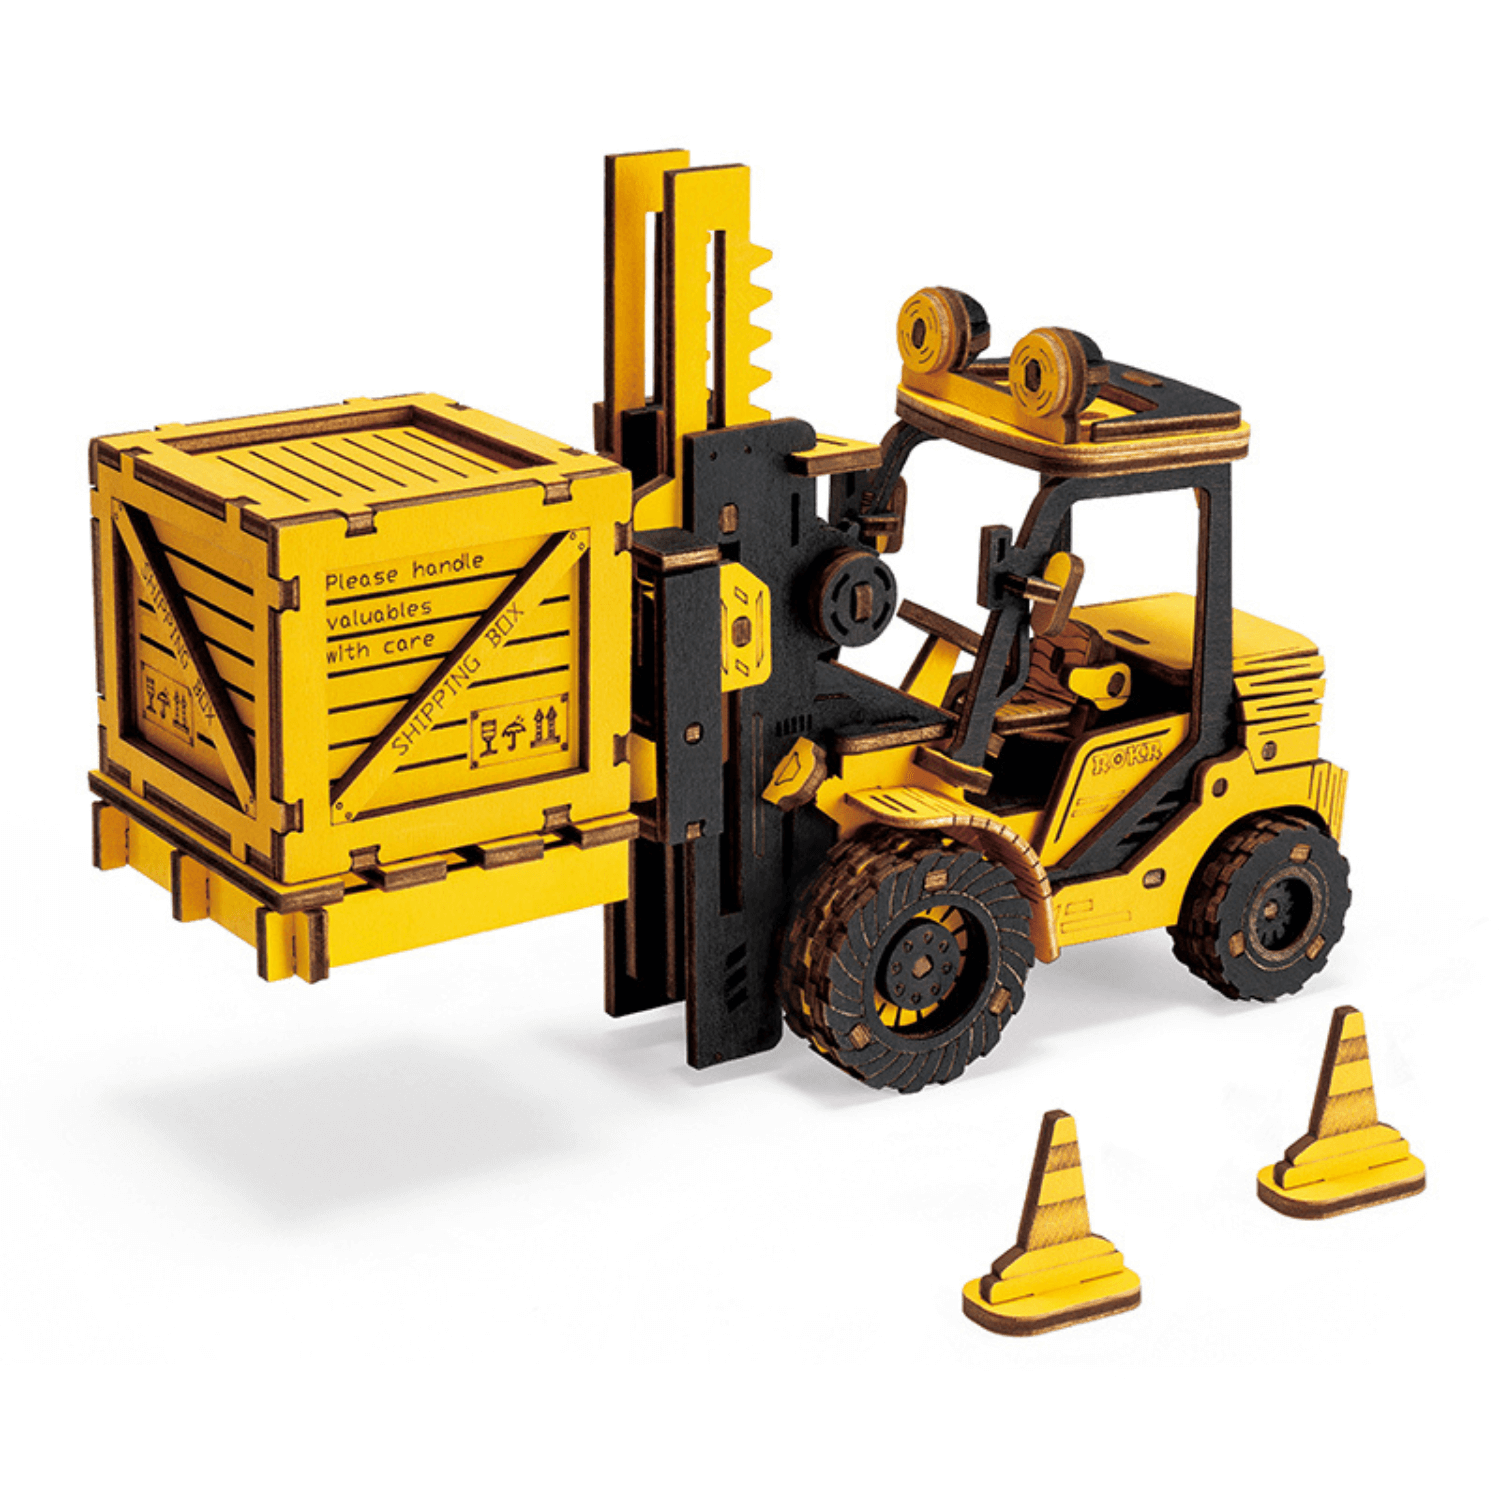 Forklift truck | Construction machinery